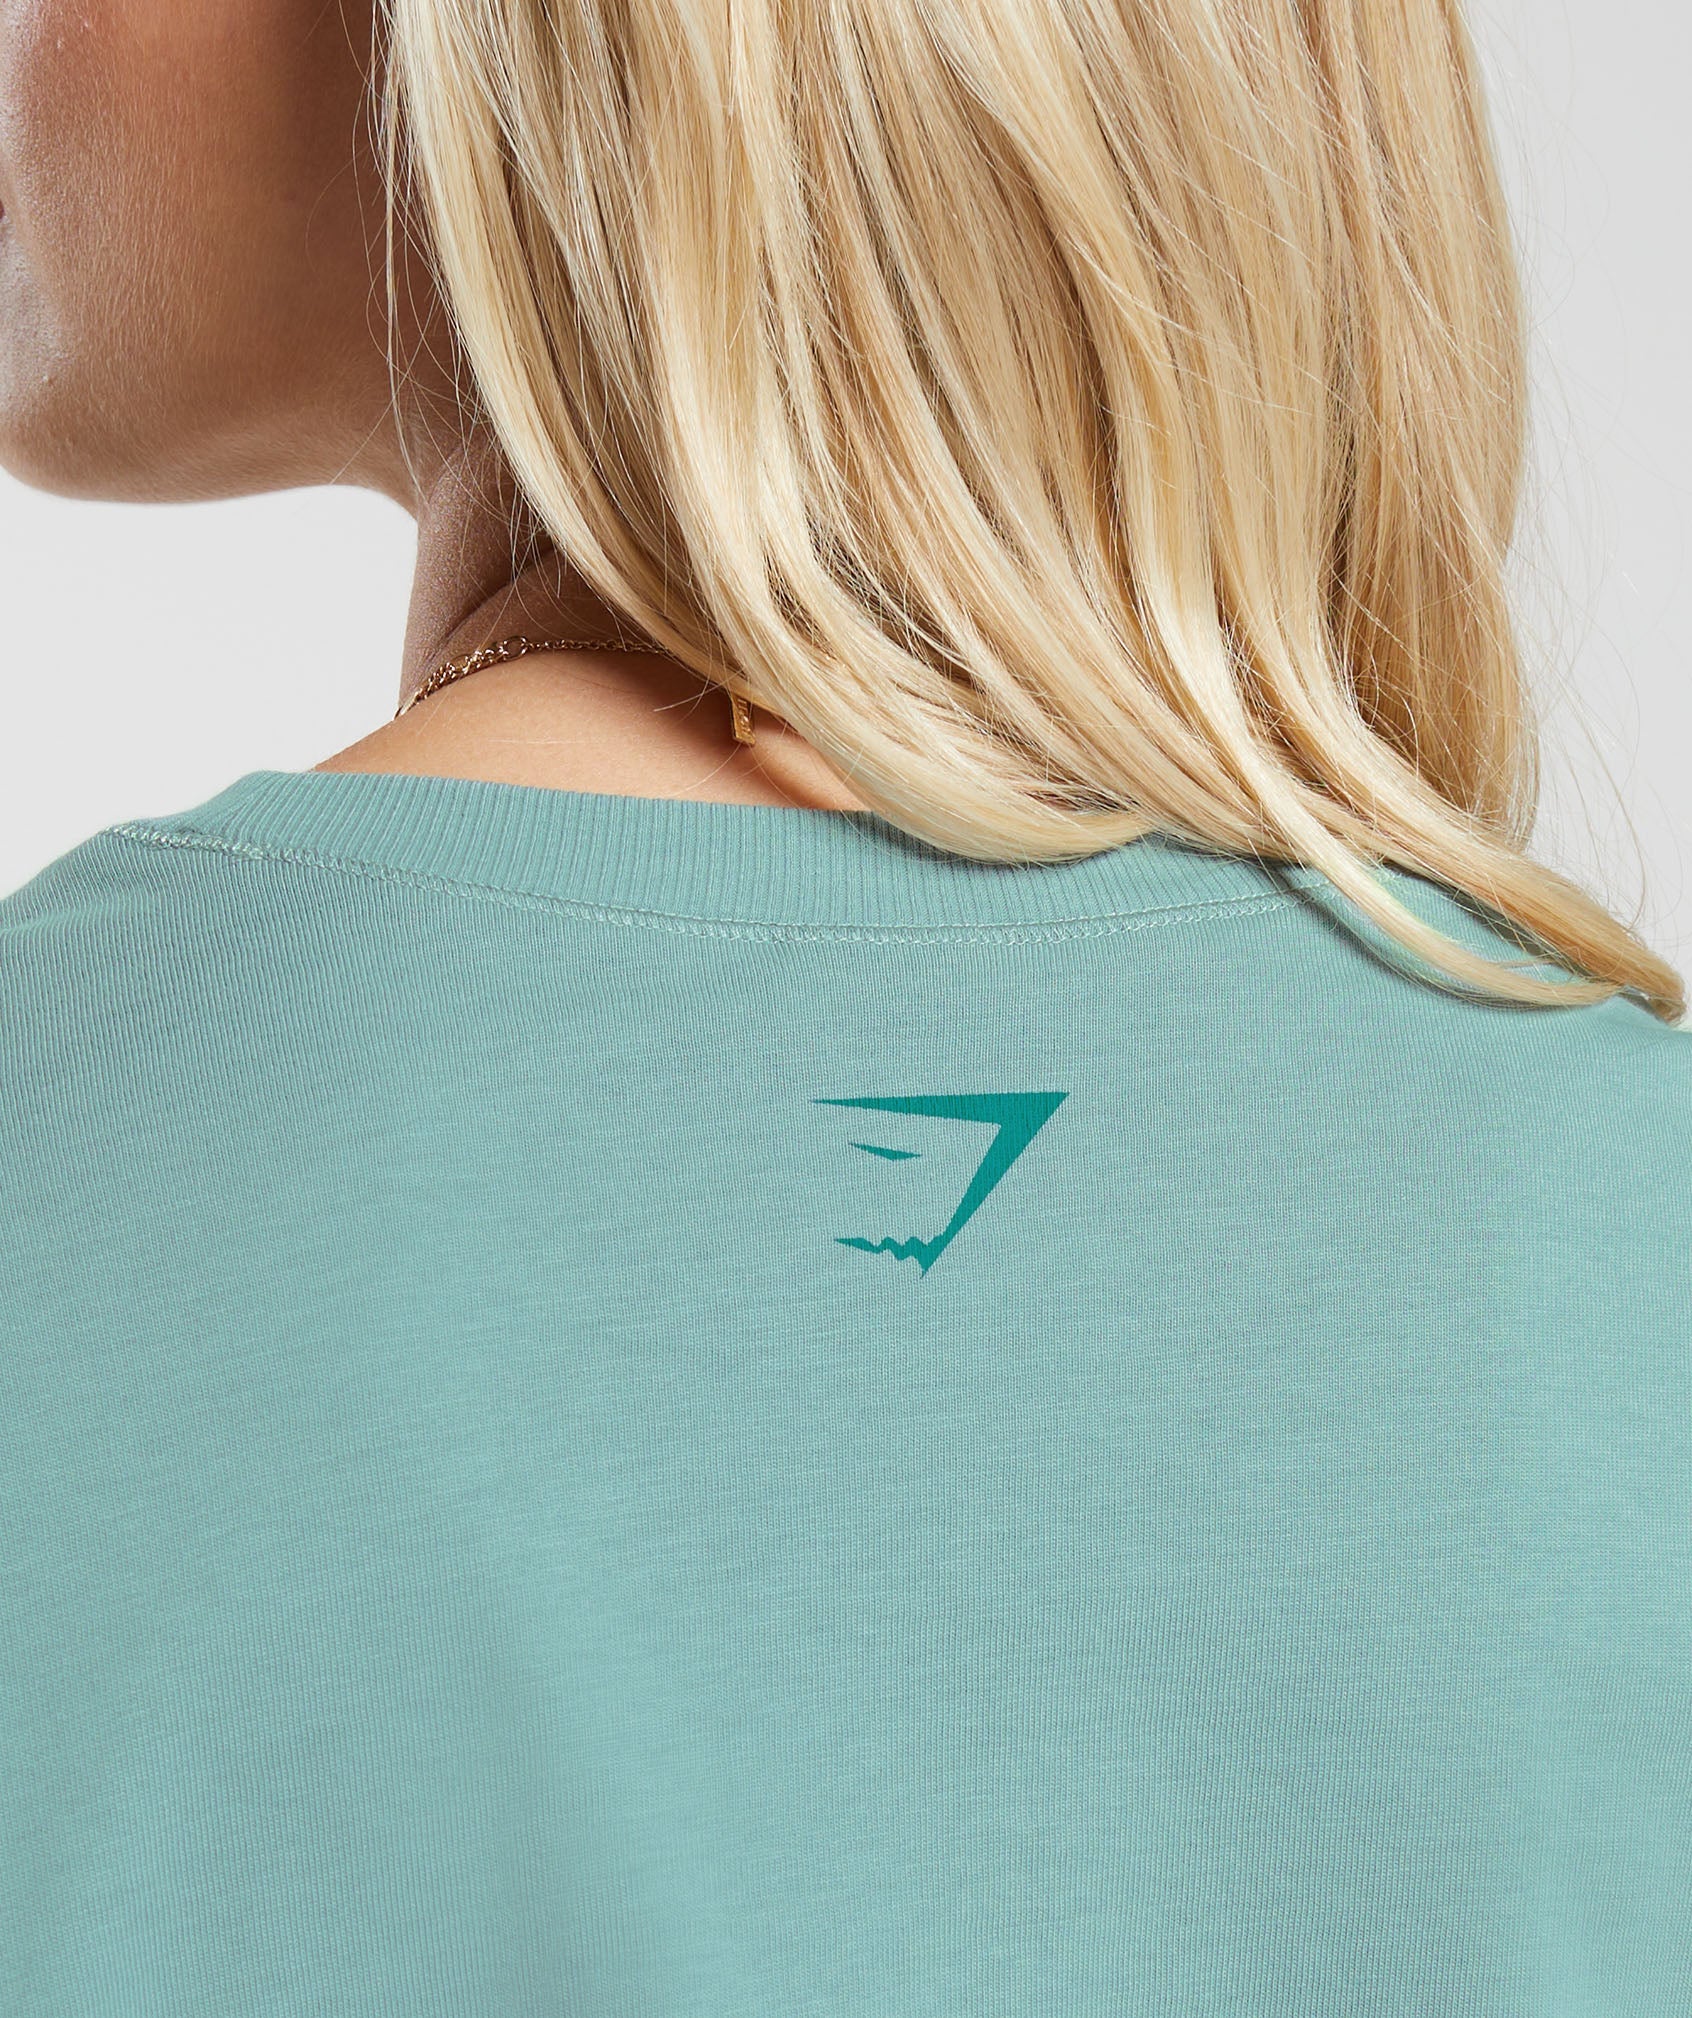 Cherub Graphic Long Sleeve Top in Duck Egg Blue - view 6